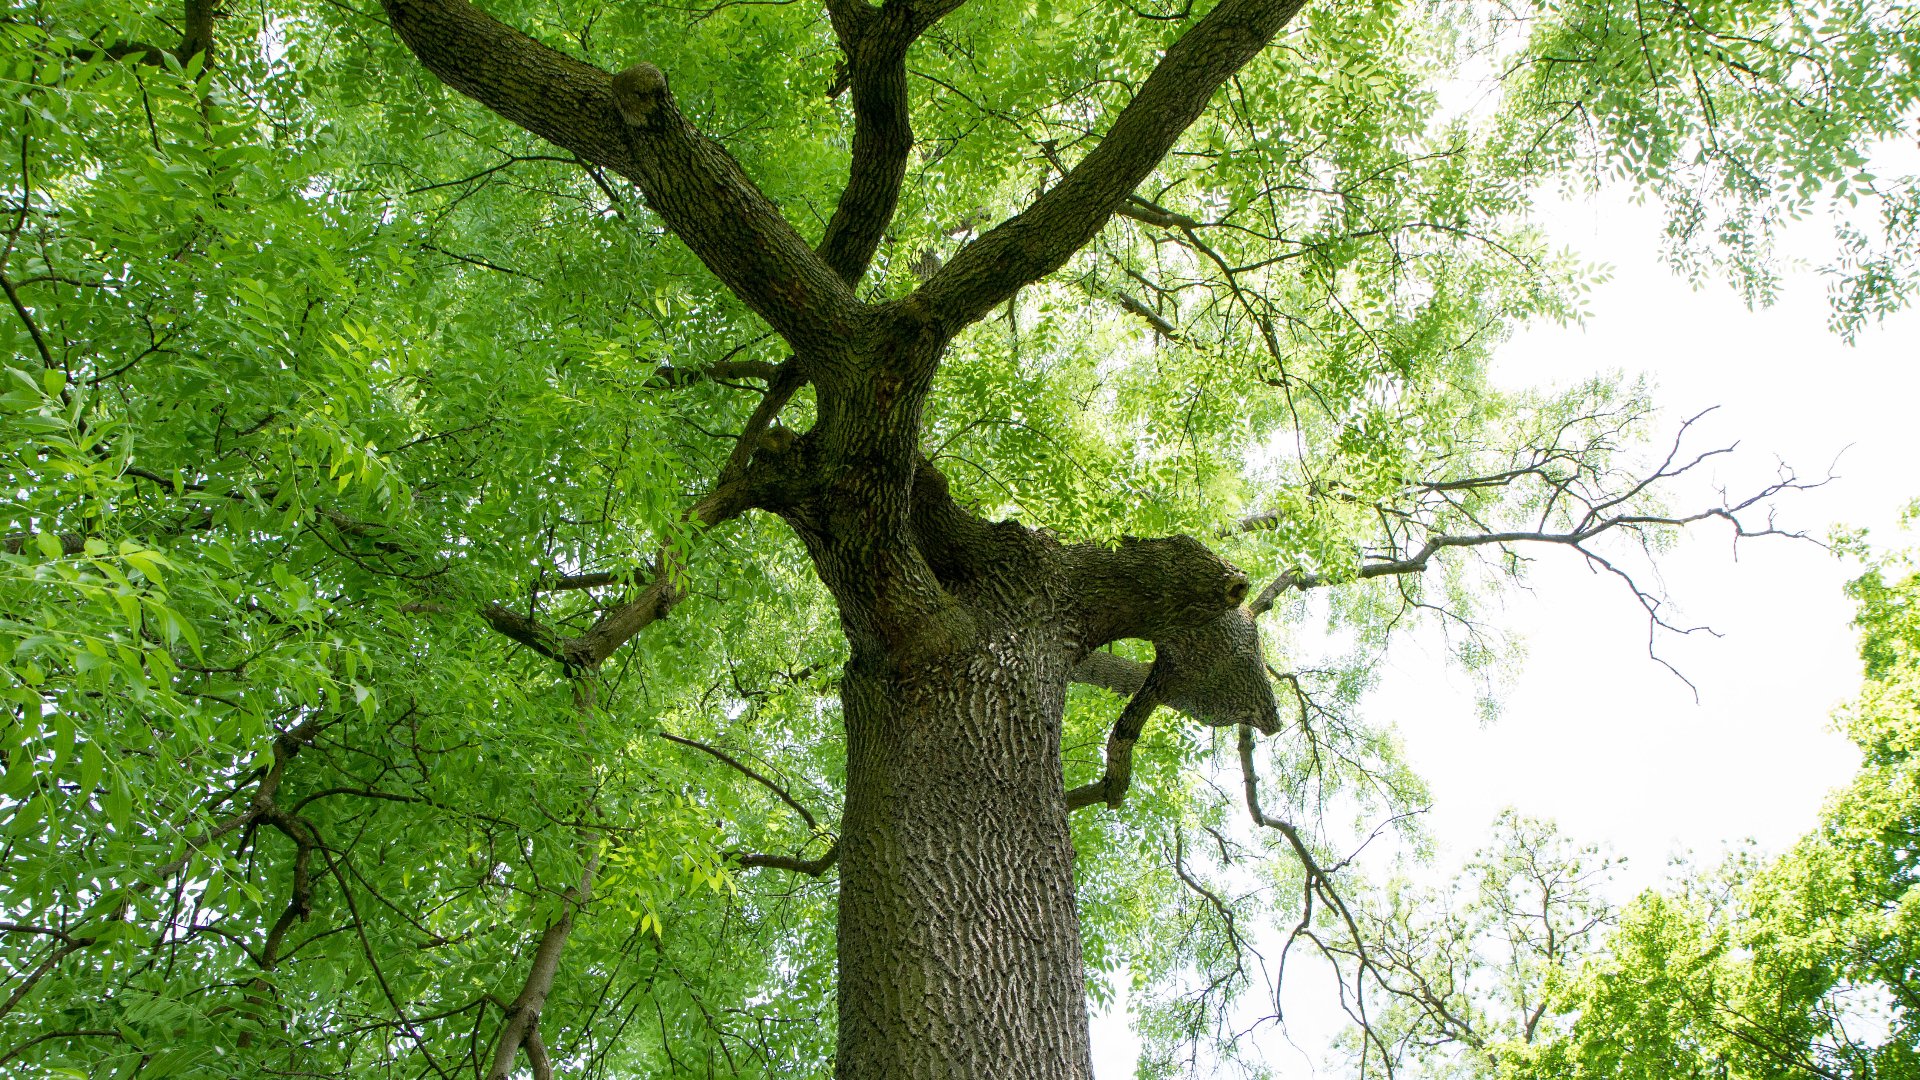 How Can I Protect My Ash Trees From Lilac Ash Borers?